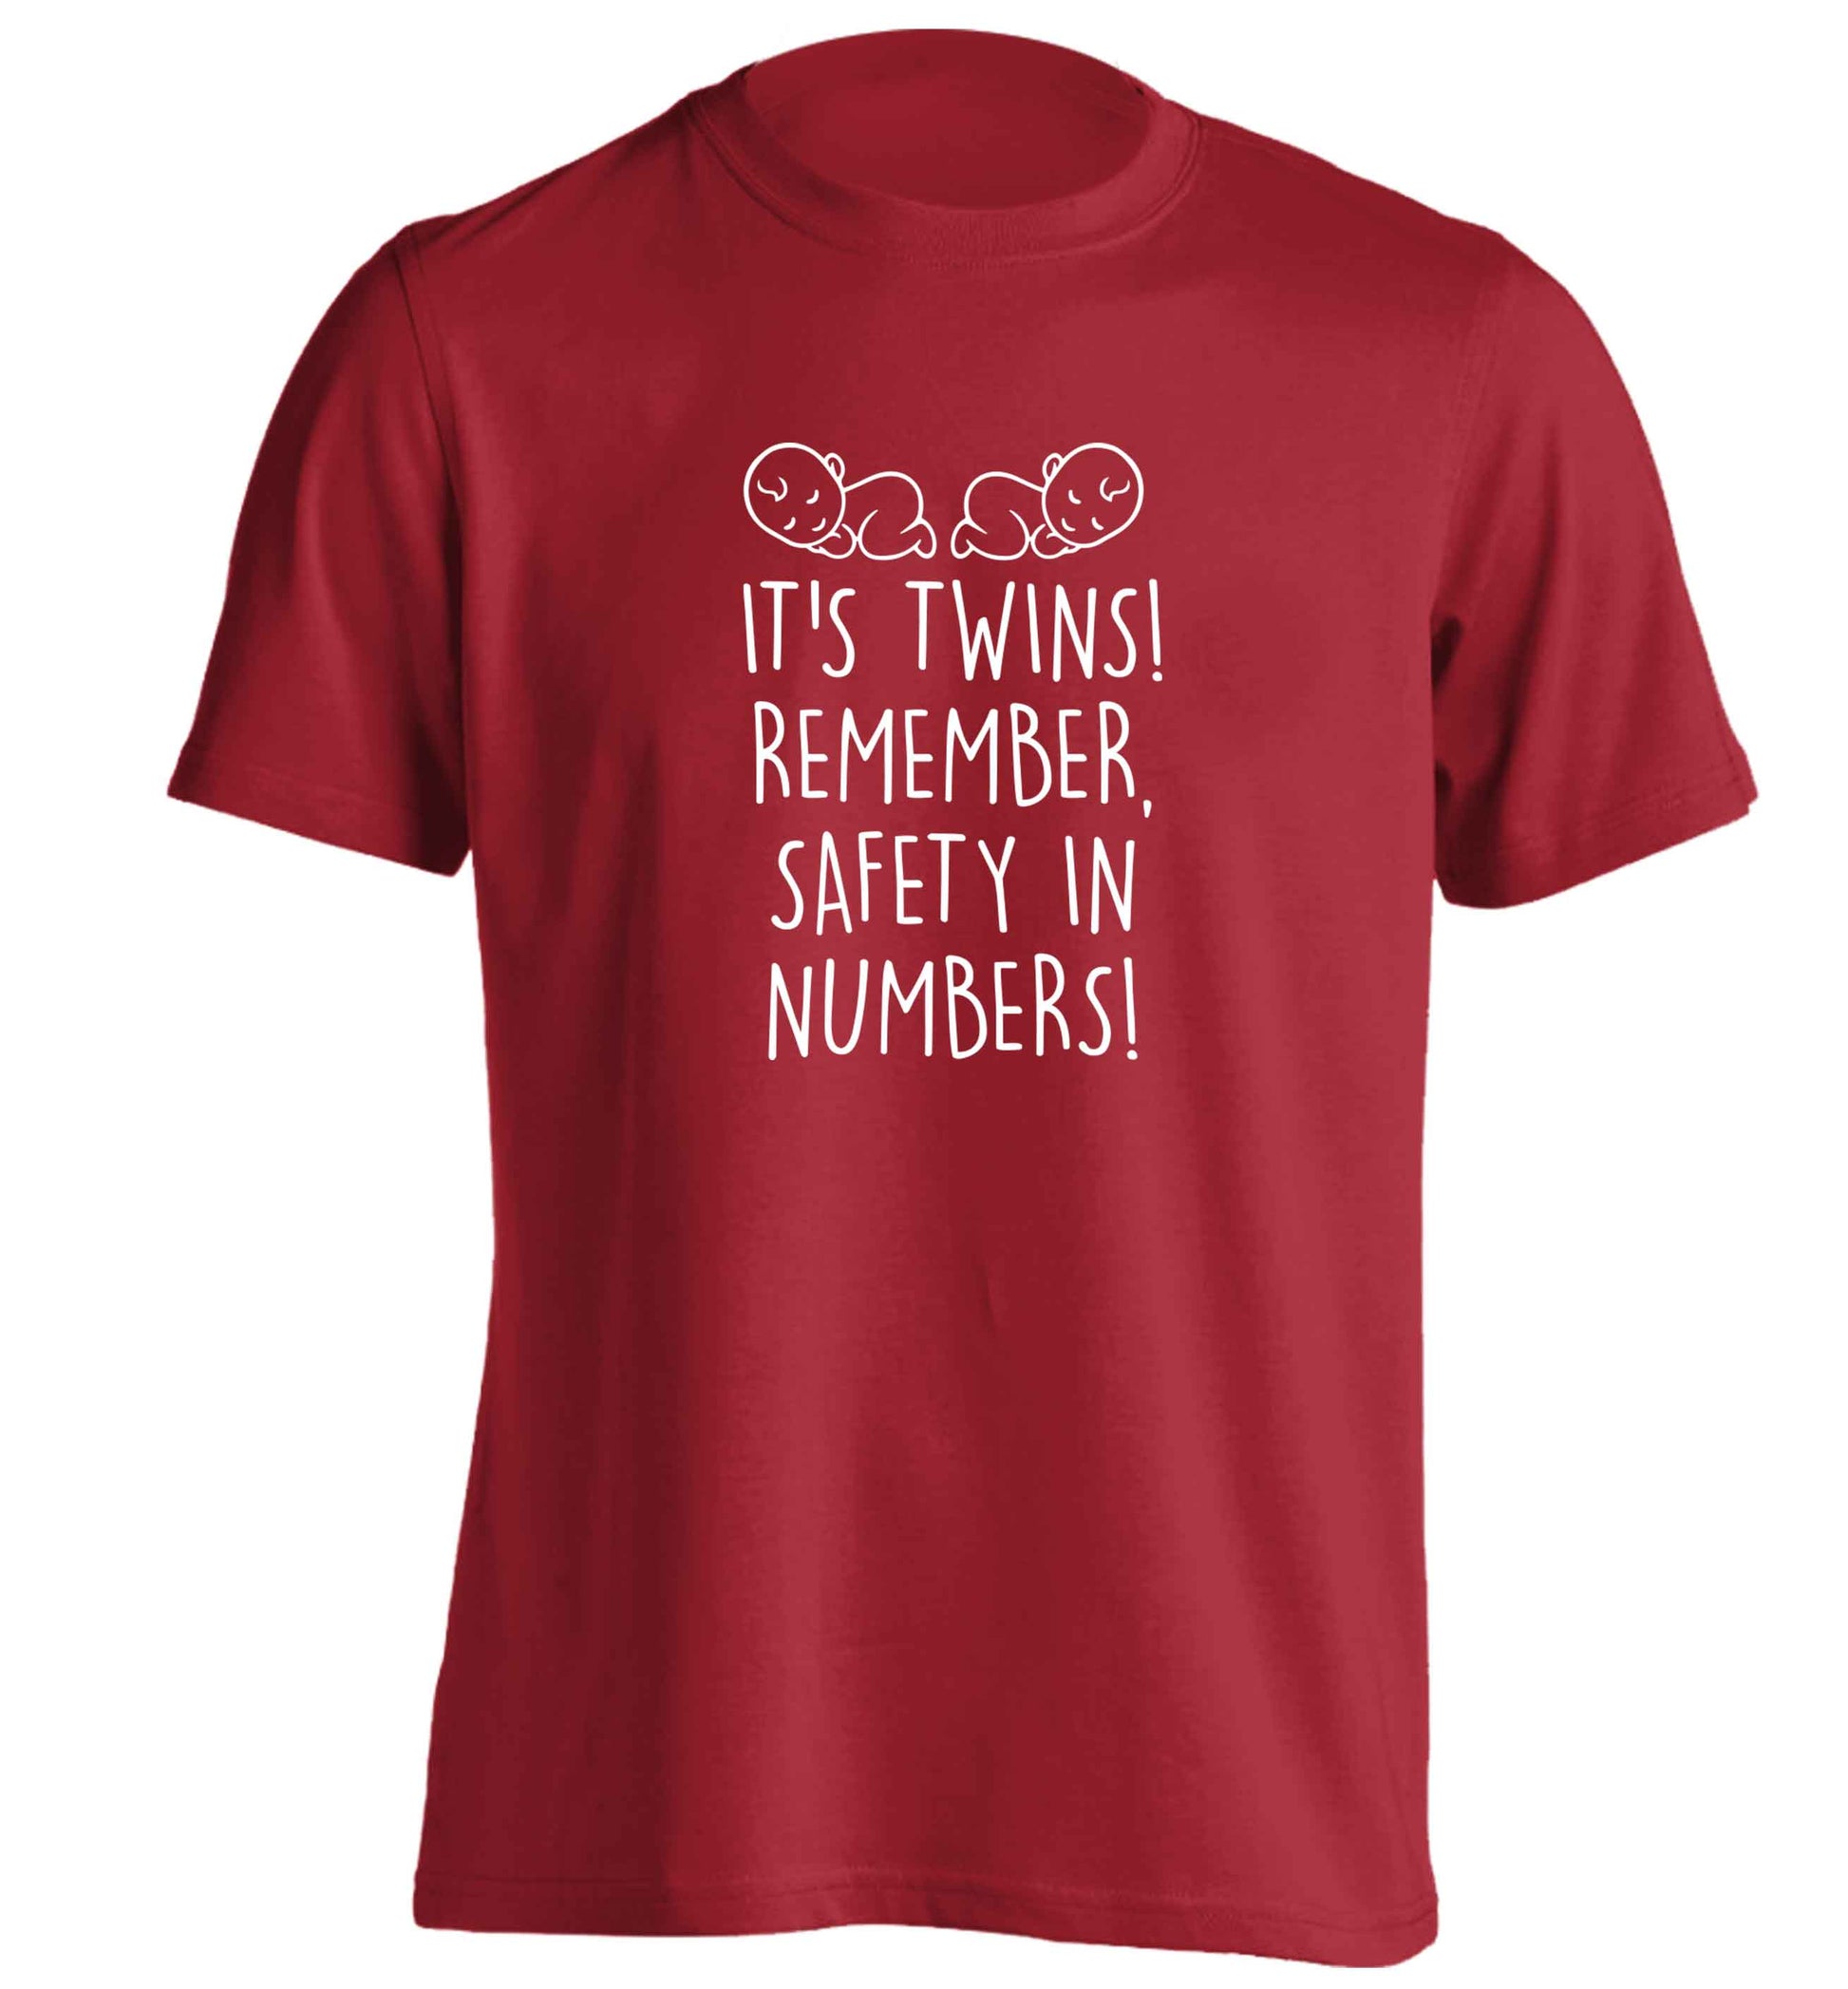 It's twins! Remember safety in numbers! adults unisex red Tshirt 2XL